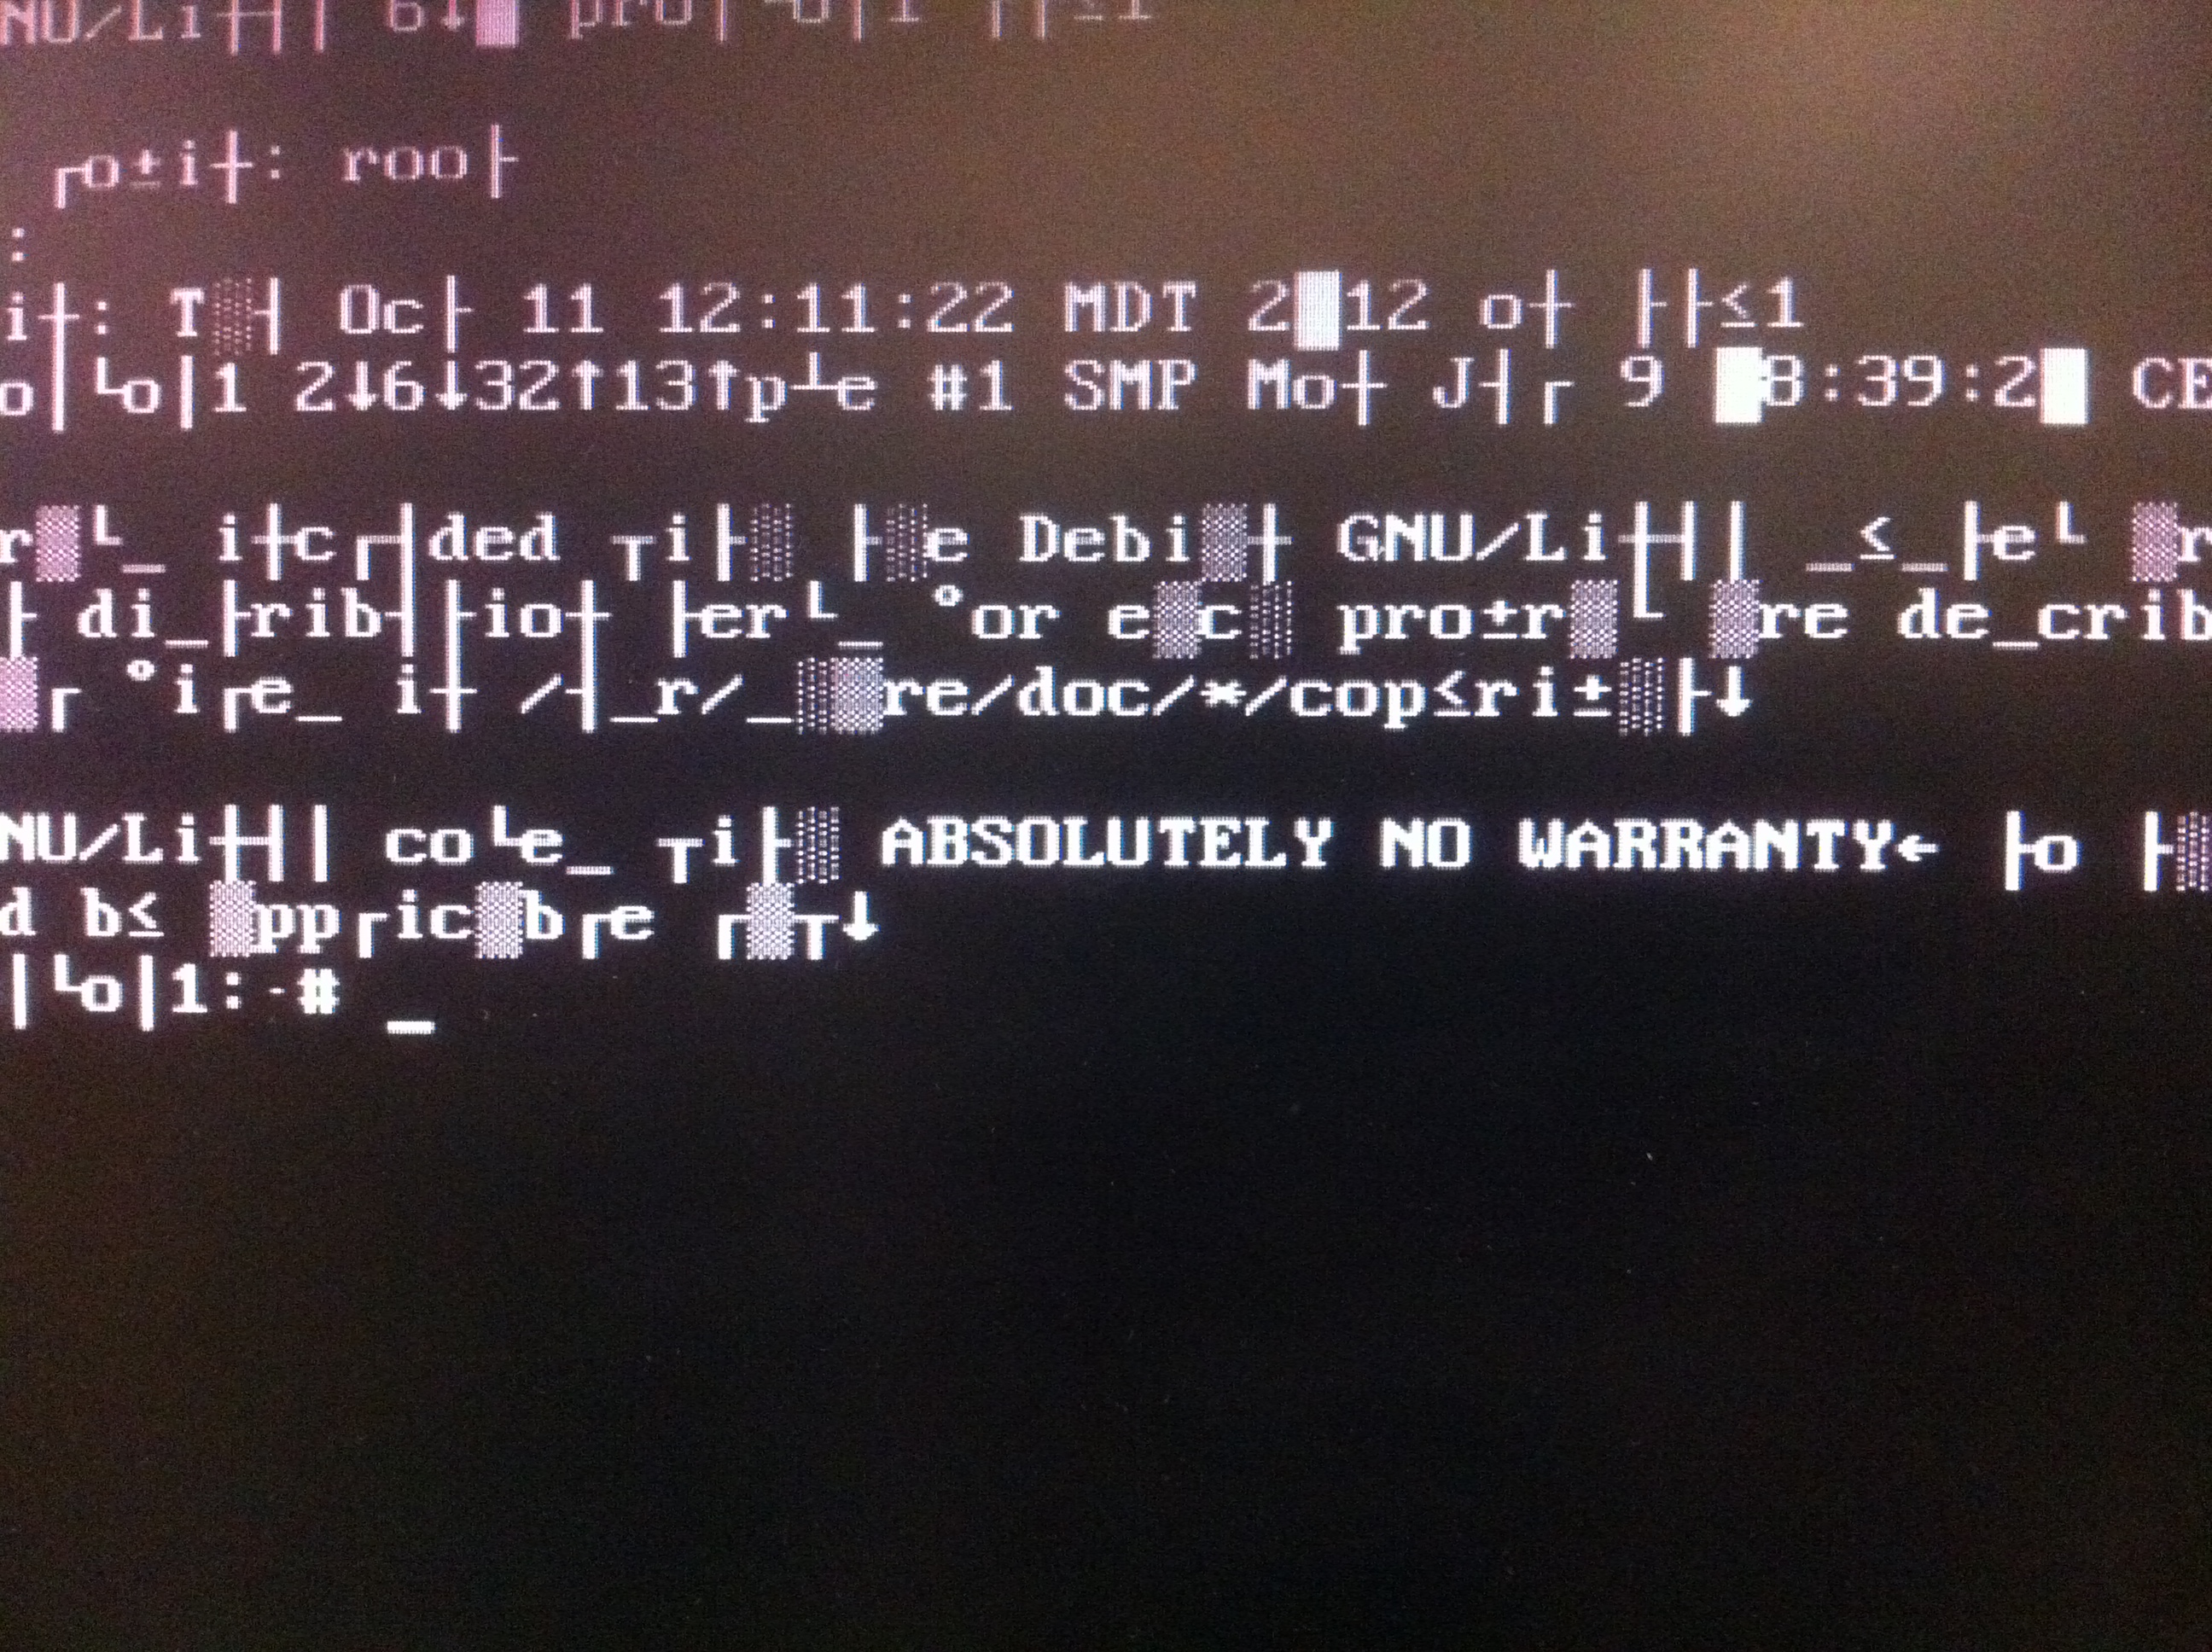 screen with garbled text and “ABSOLUTELY NO WARRANTY” legible